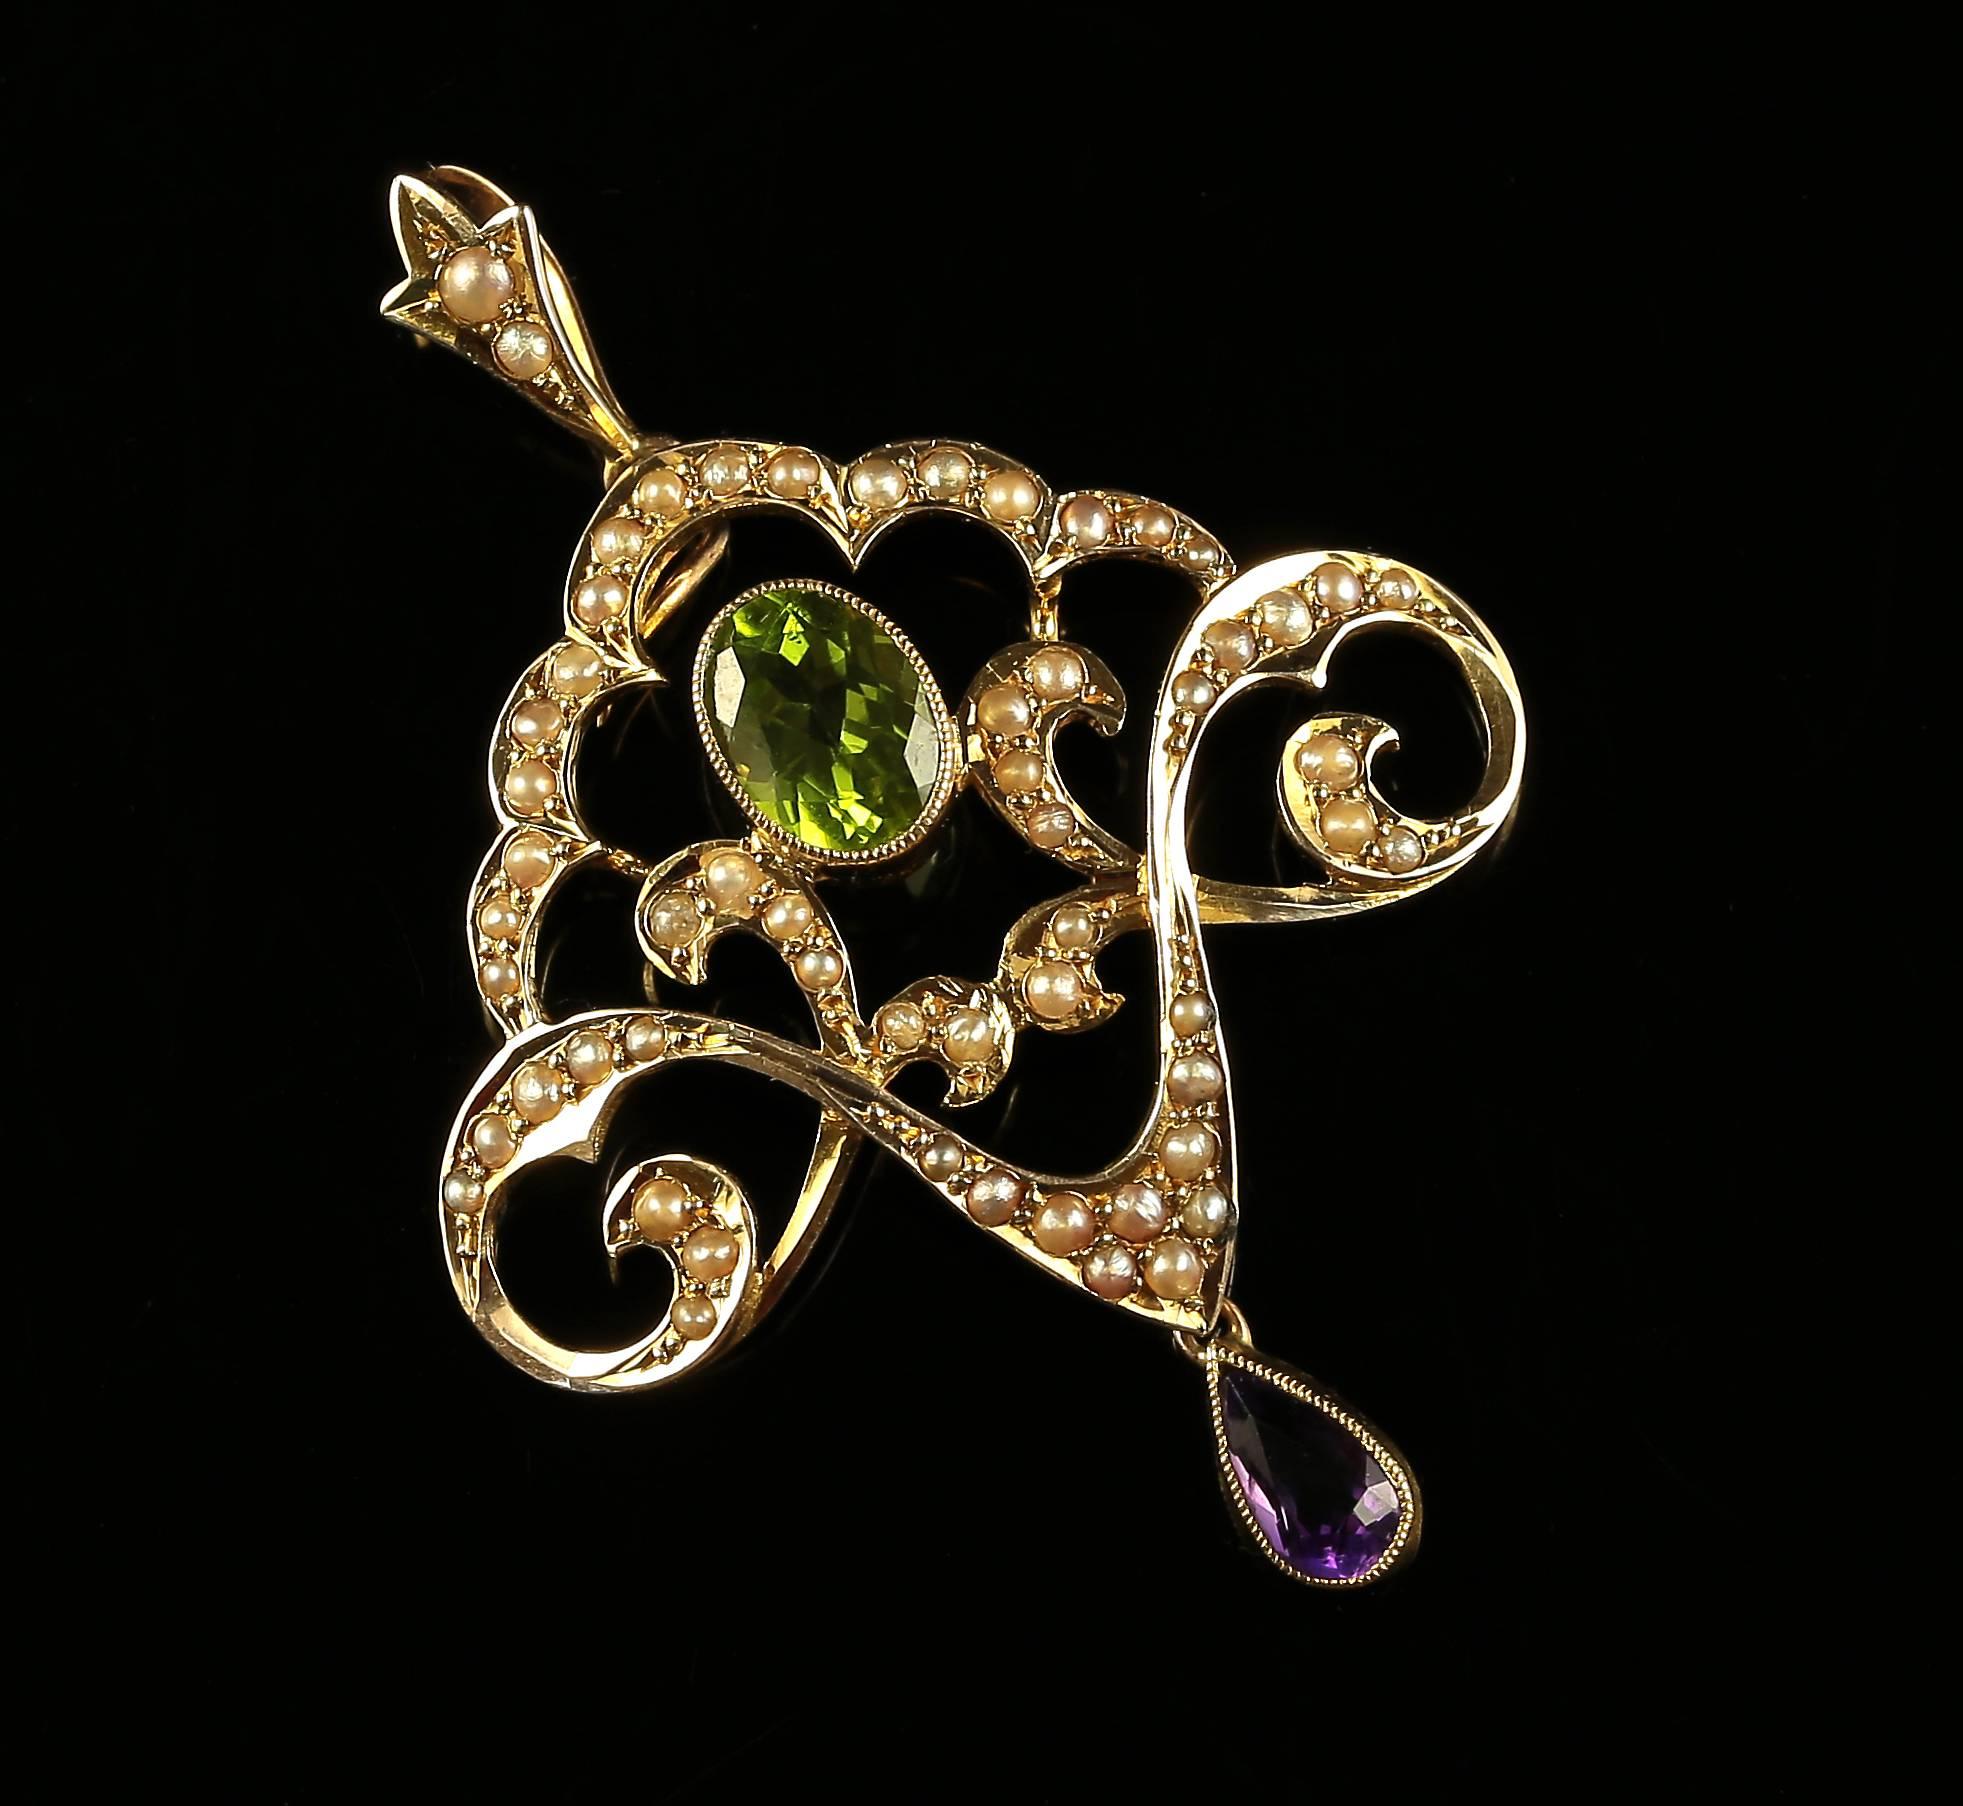 Antique Victorian Suffragette Pendant Amethyst Peridot Pearls, circa 1900 In Excellent Condition For Sale In Lancaster, Lancashire